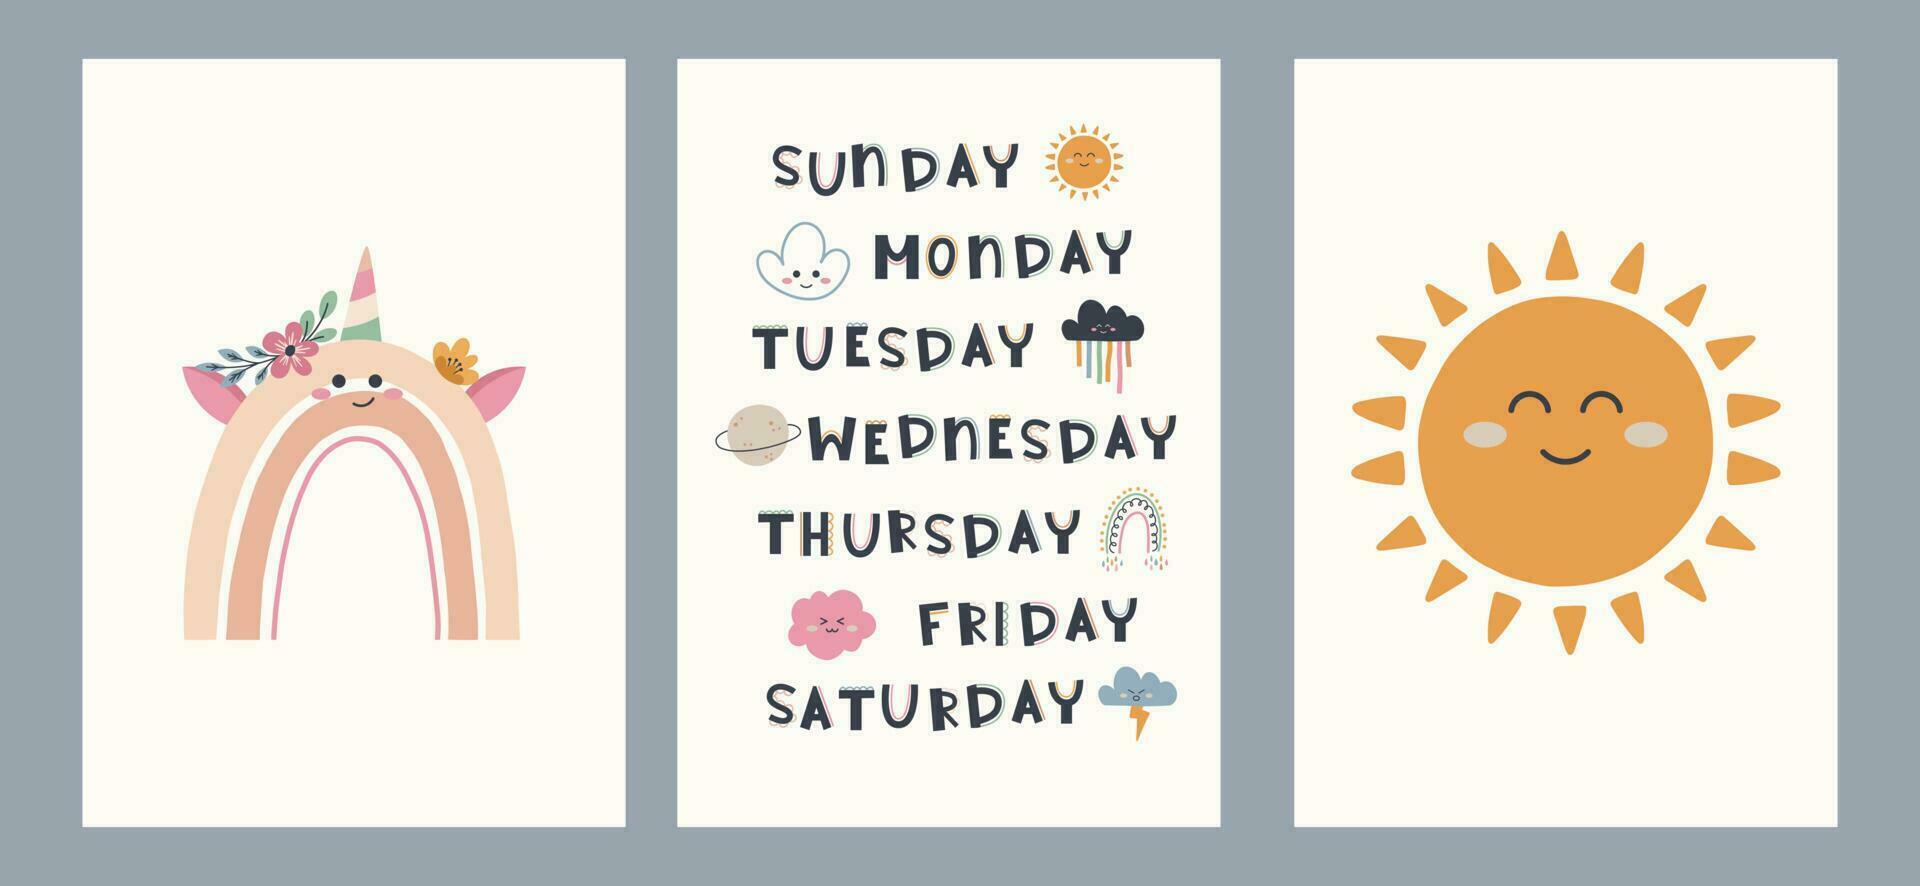 Cute hand drawn posters with rainbow, weather, education elements in boho style. Cartoon doodle print with days of the week for nursery. Design for card, label, brochure, book cover, poster, flyer vector